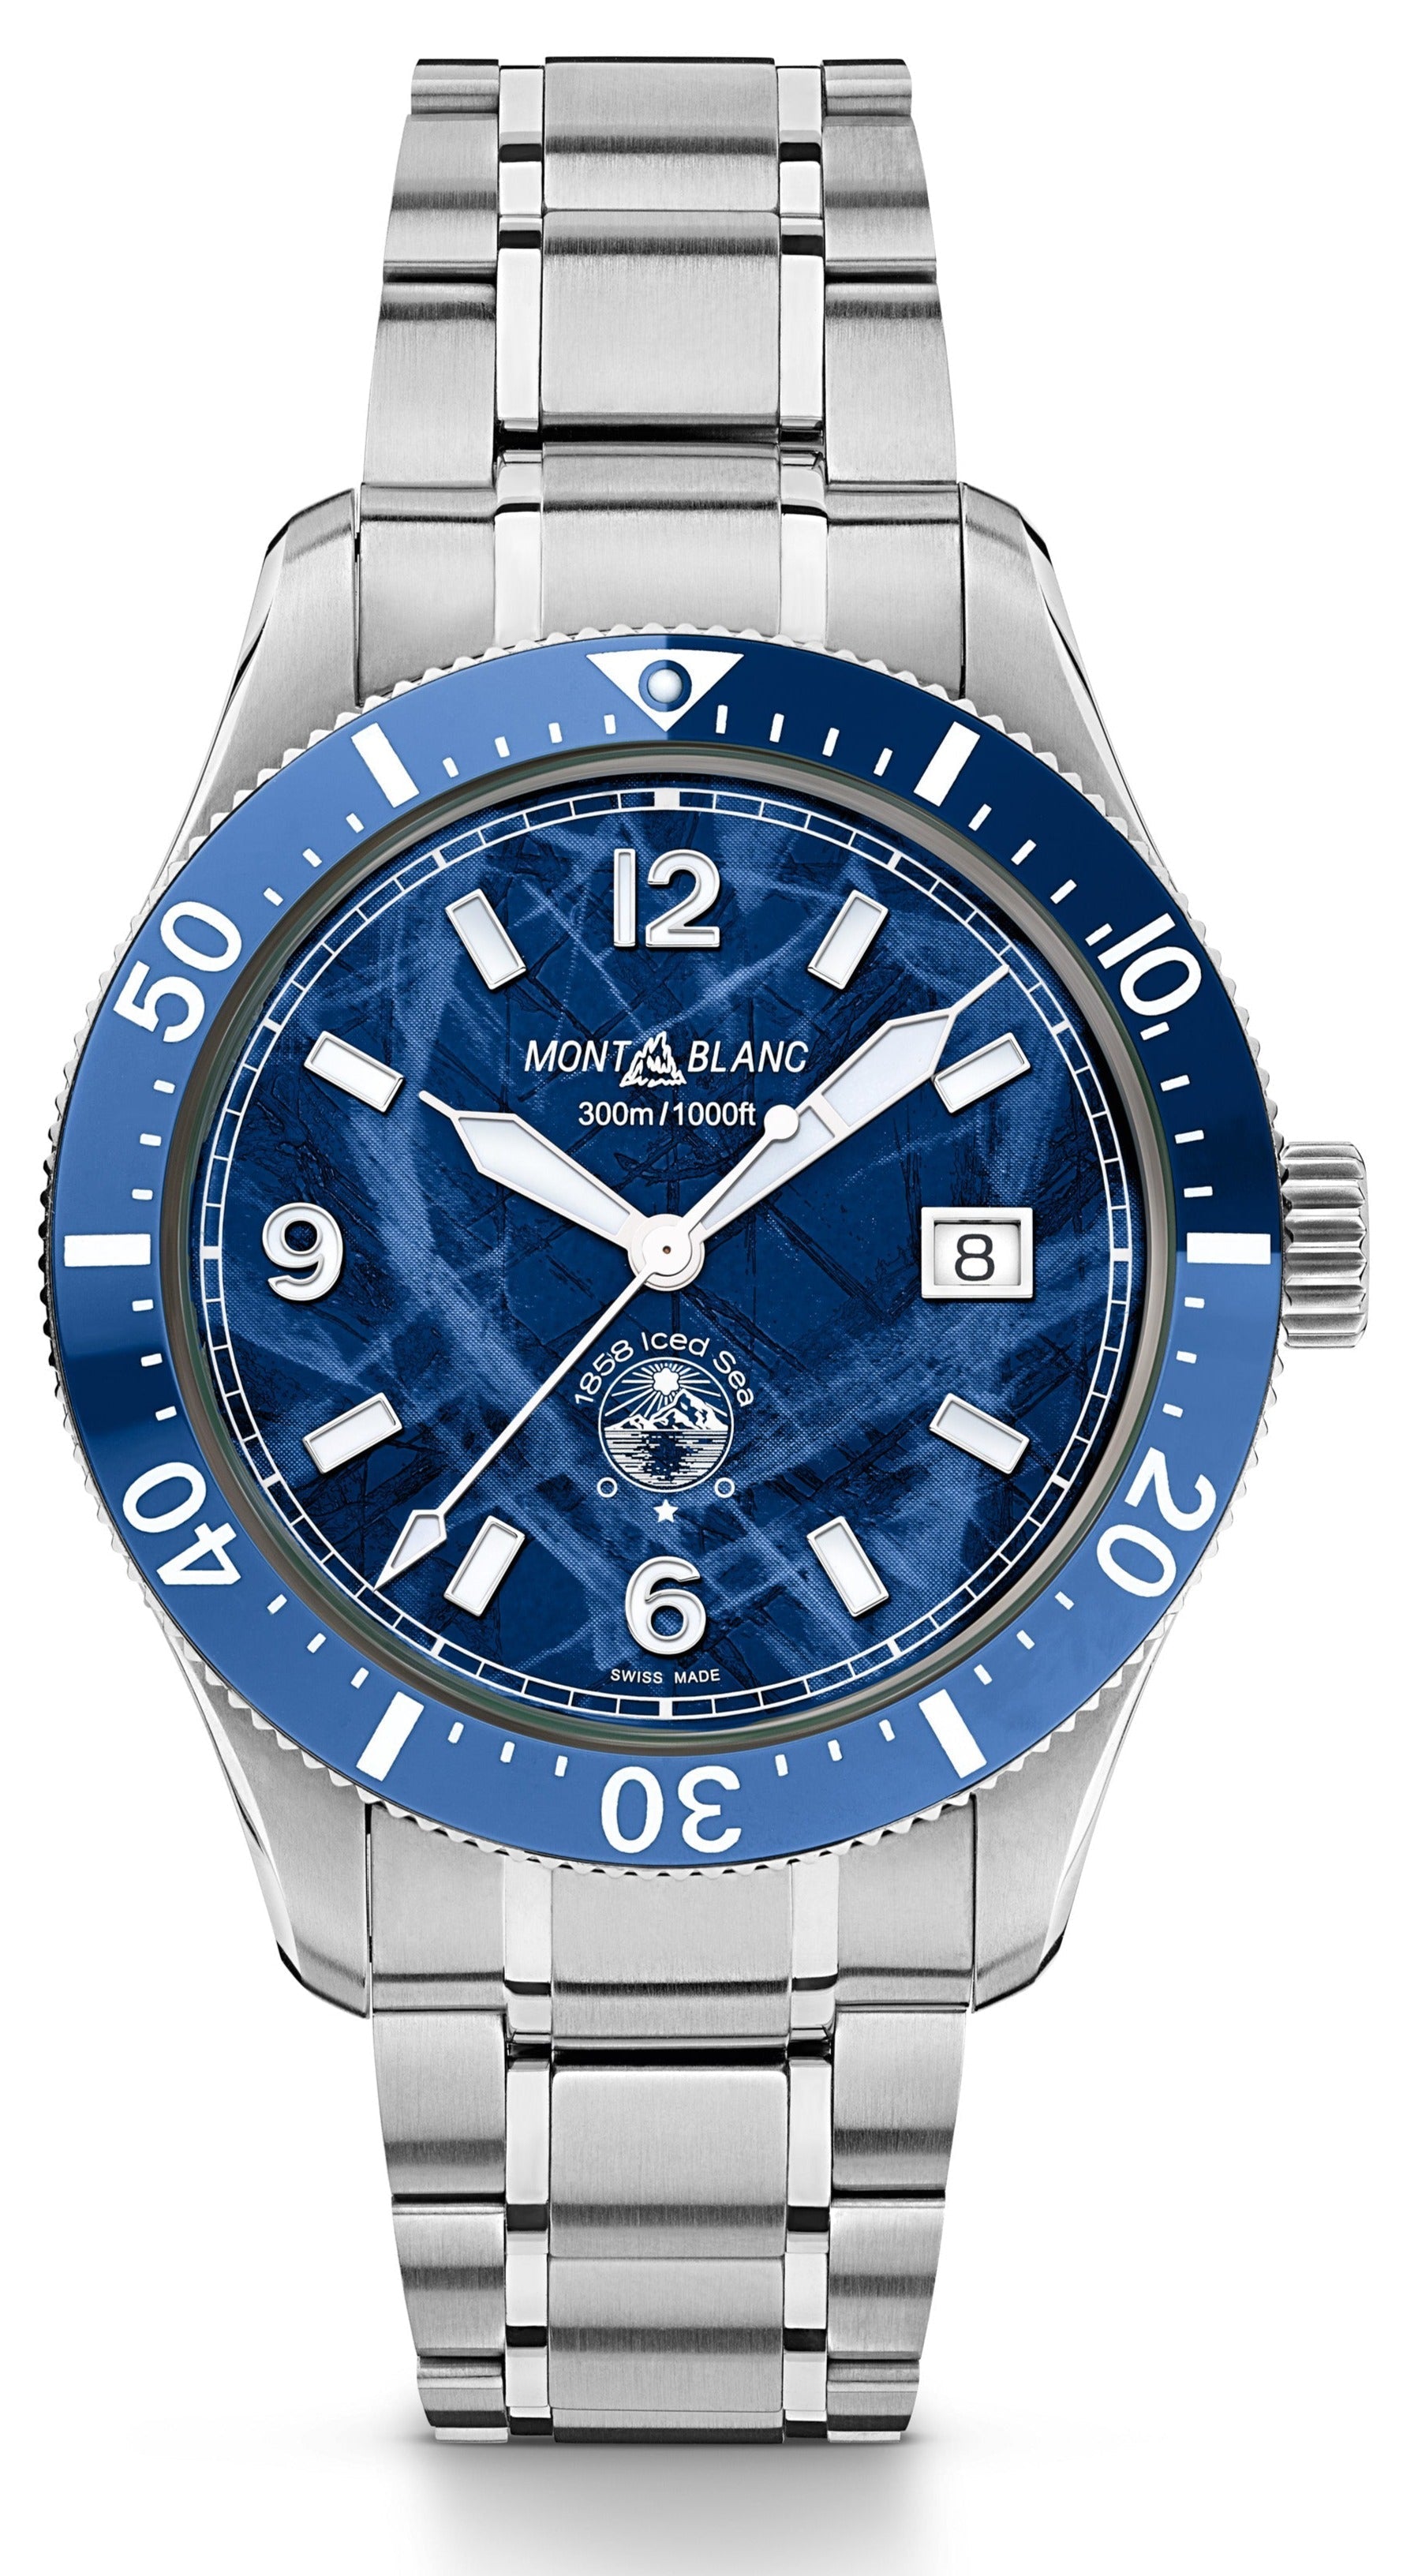 Photos - Wrist Watch Mont Blanc Montblanc Watch Iced Sea Automatic Date - Blue MNTB-169 